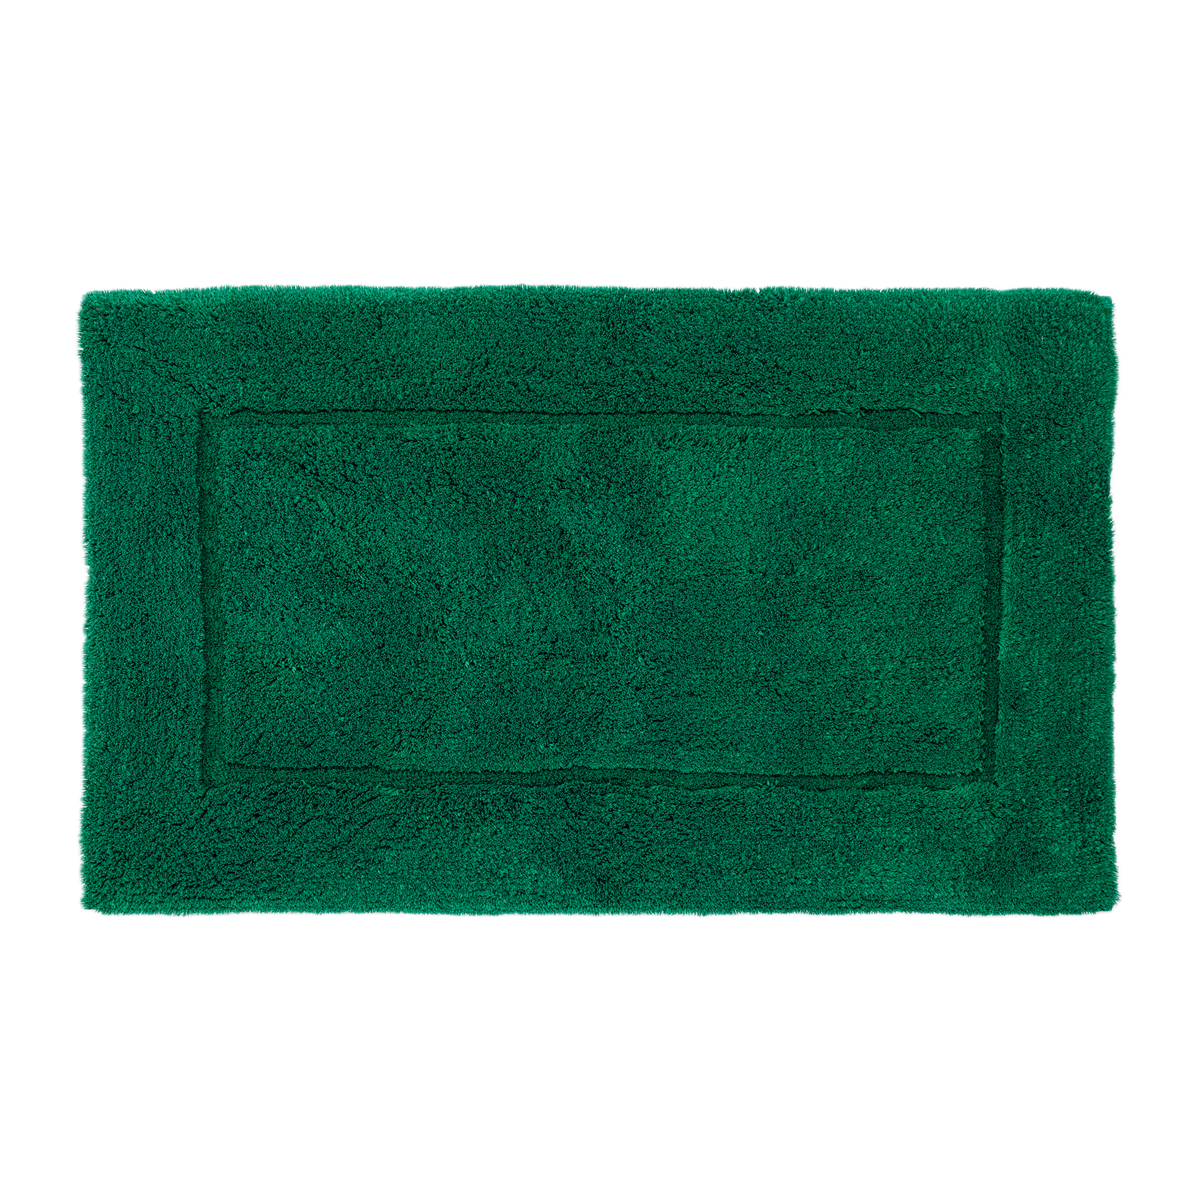 Abyss Habidecor Must Bath Rug in British Green Color